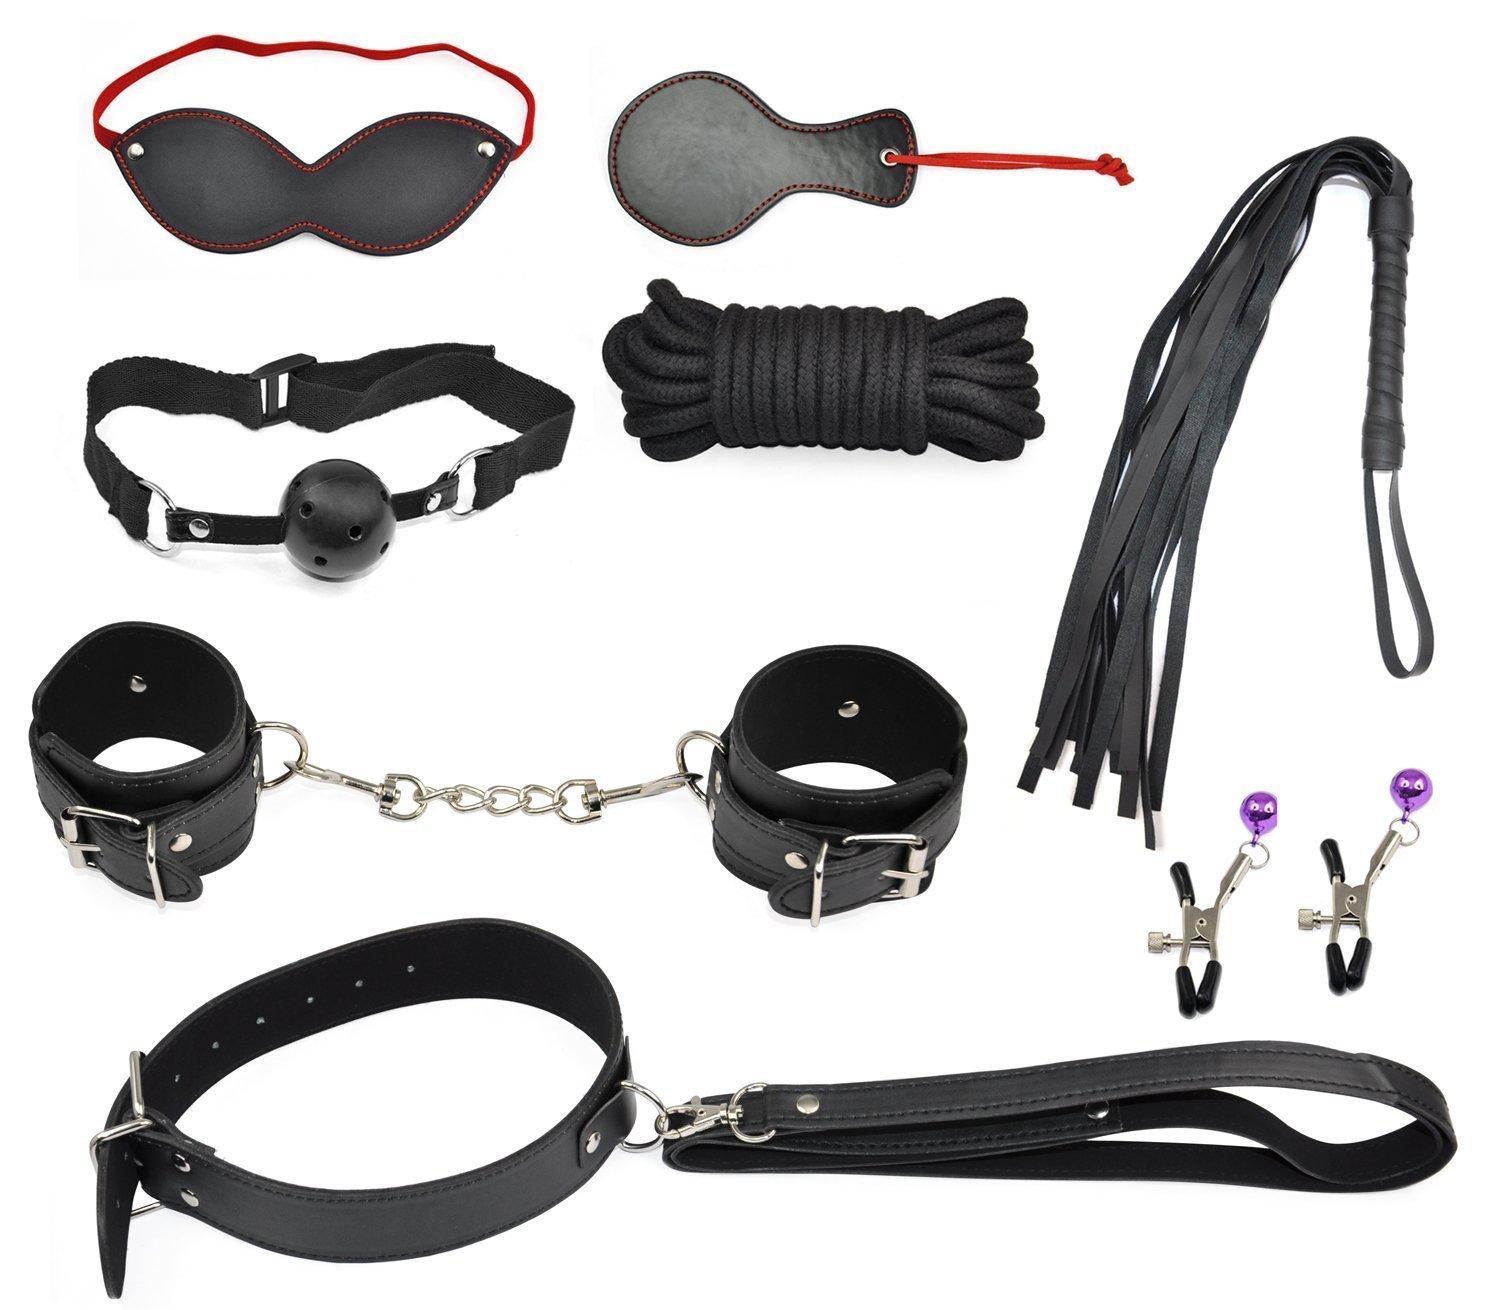 BDSM SEX TOYS: SOME THINGS FOR YOU TO TRY